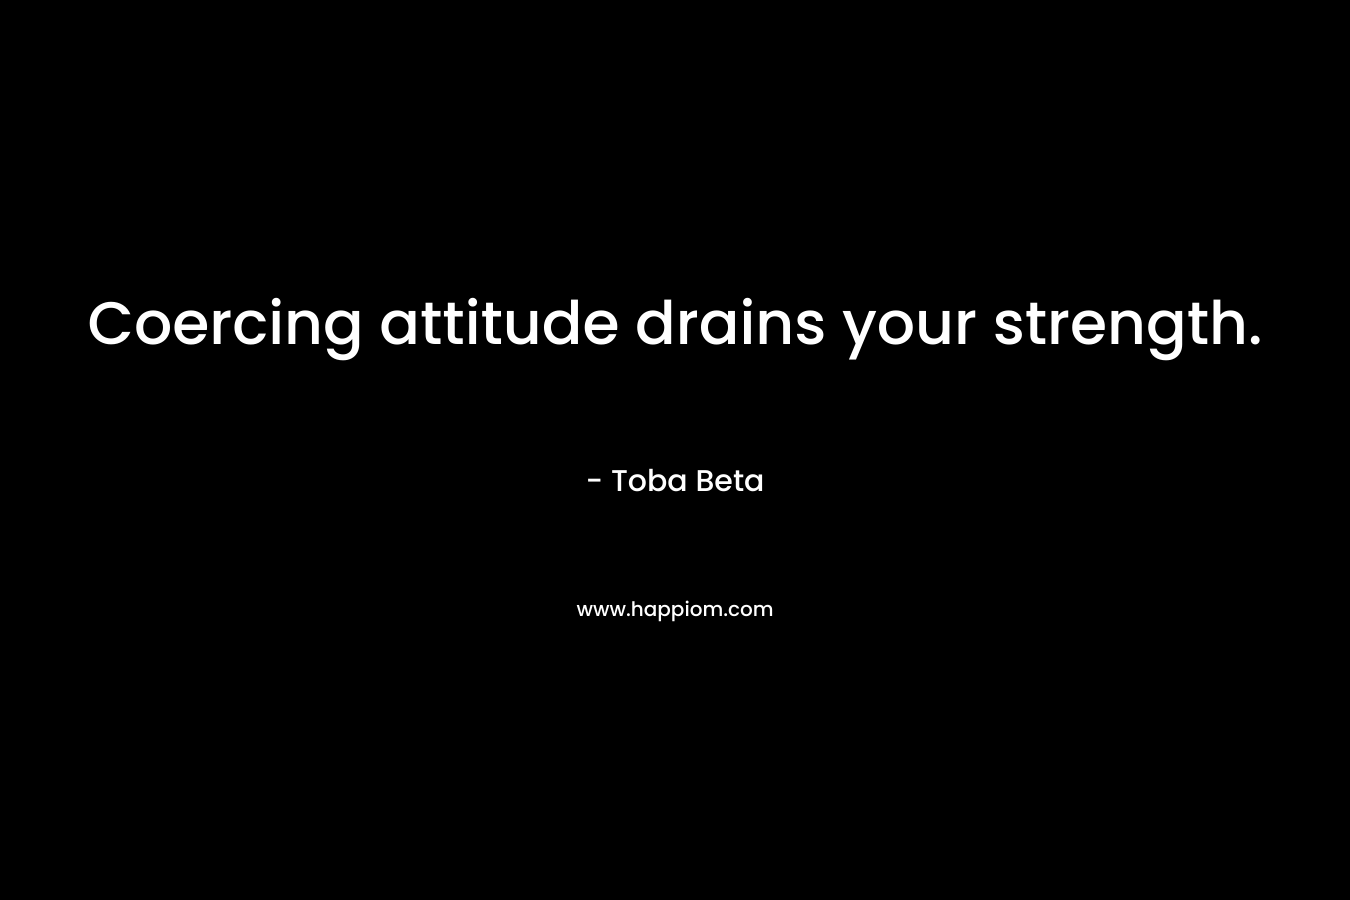 Coercing attitude drains your strength.